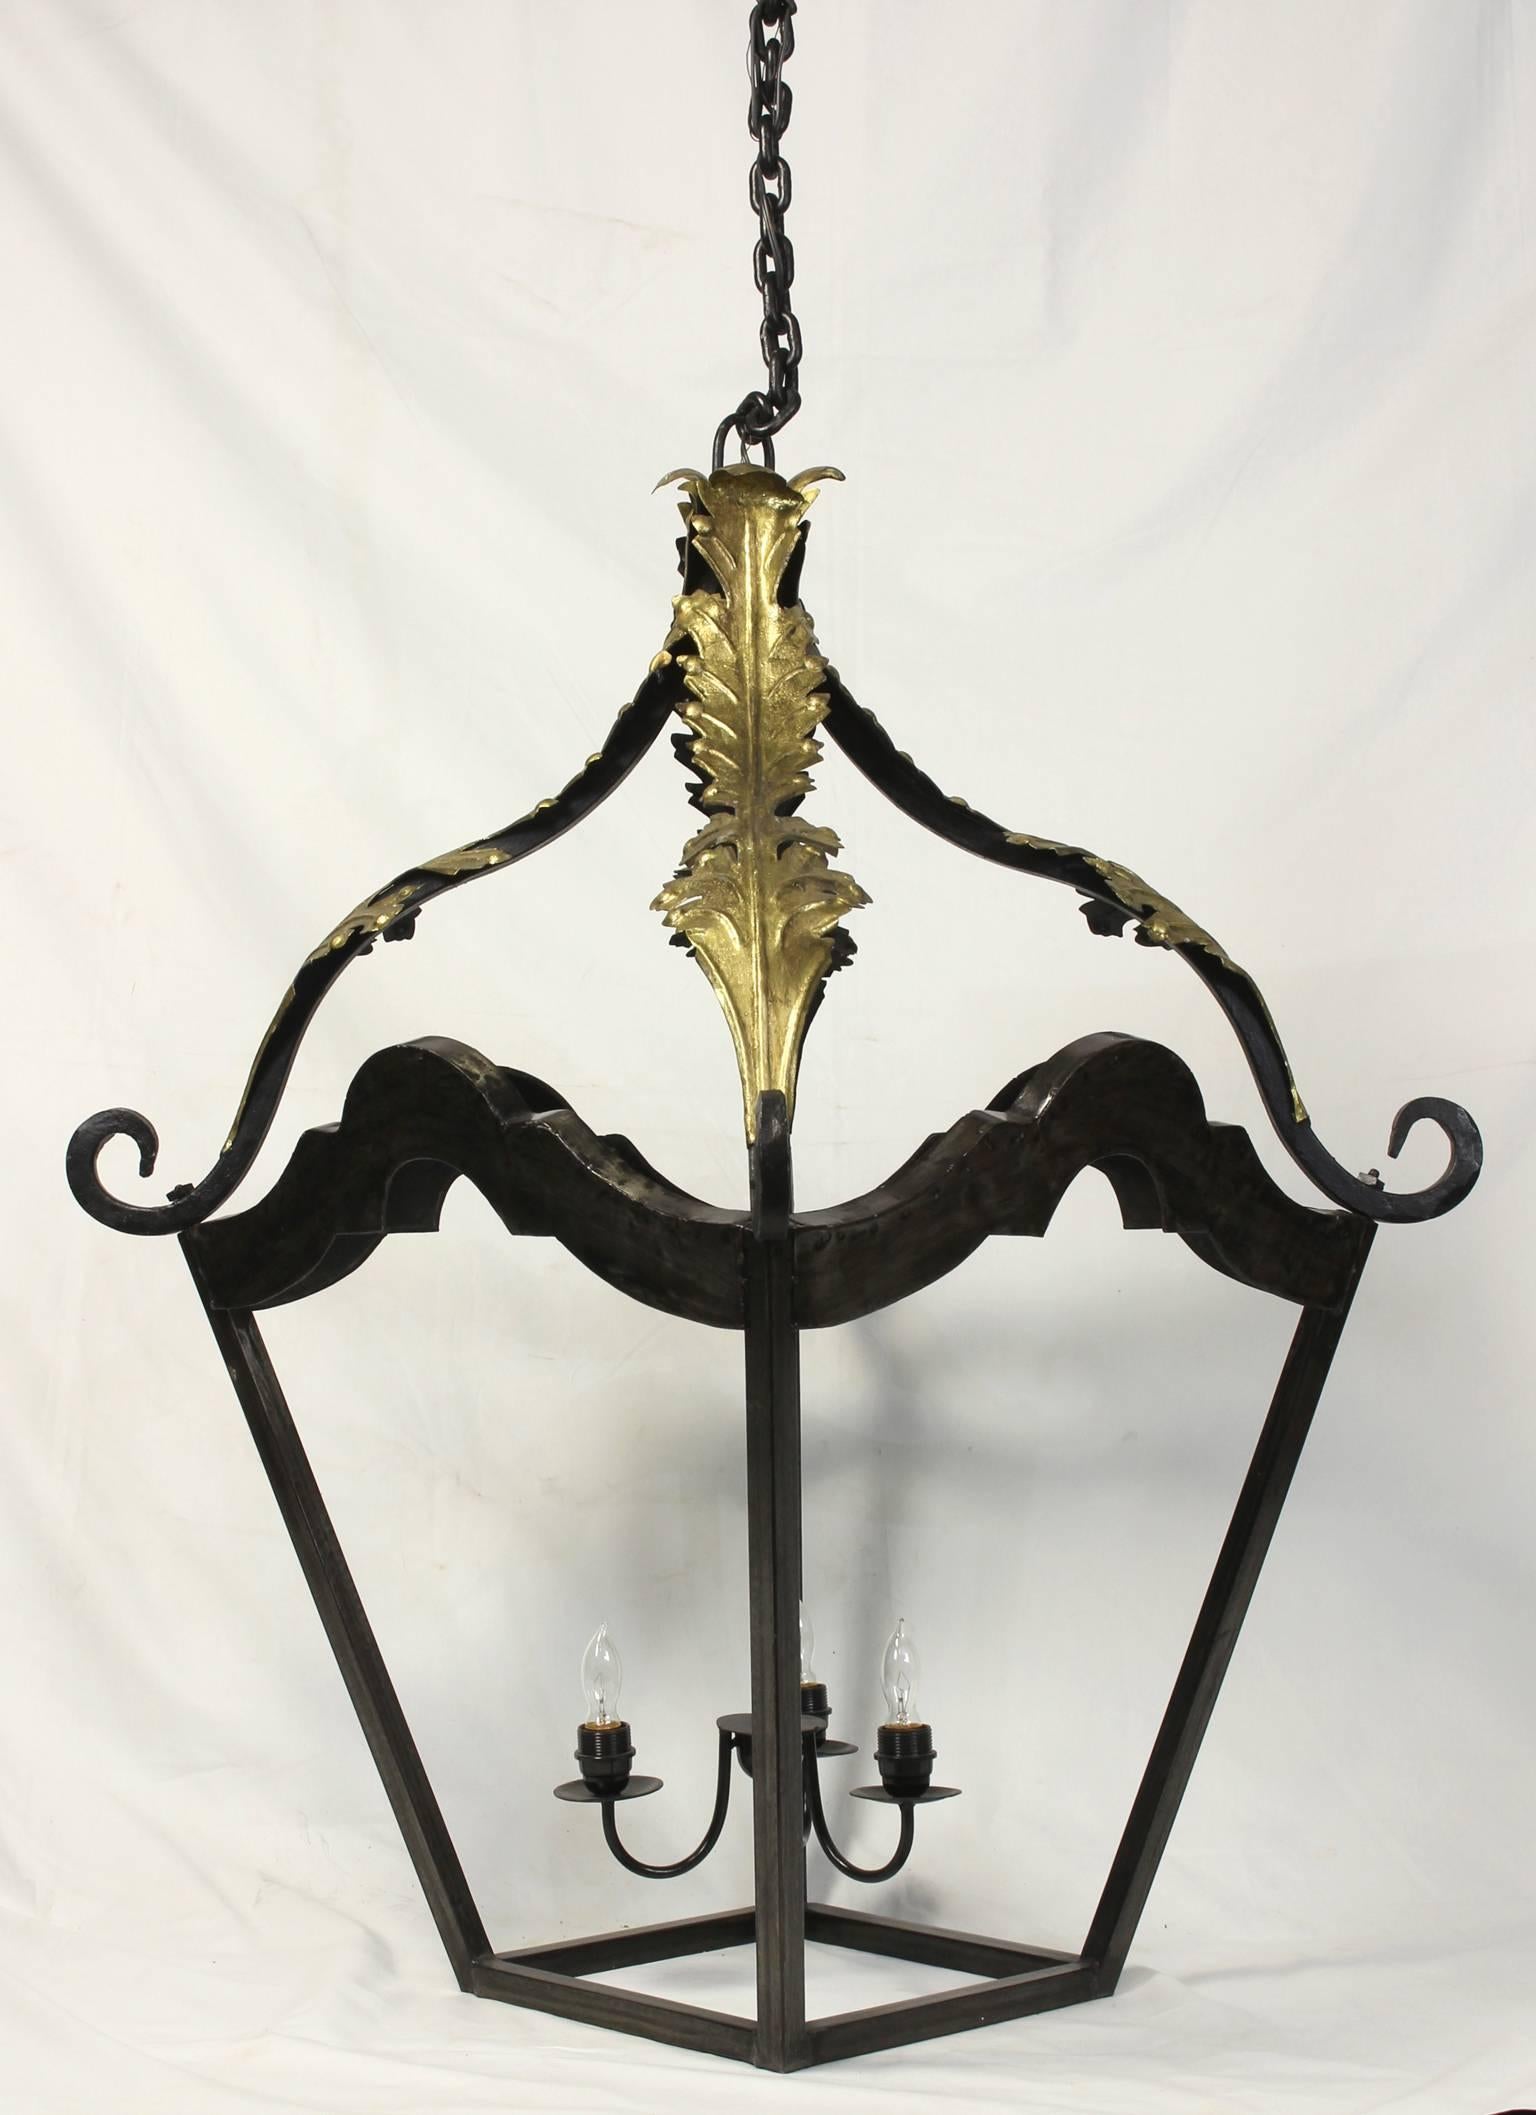 A massive French style forged metal hanging lantern accented with gold acanthus leaf accents.